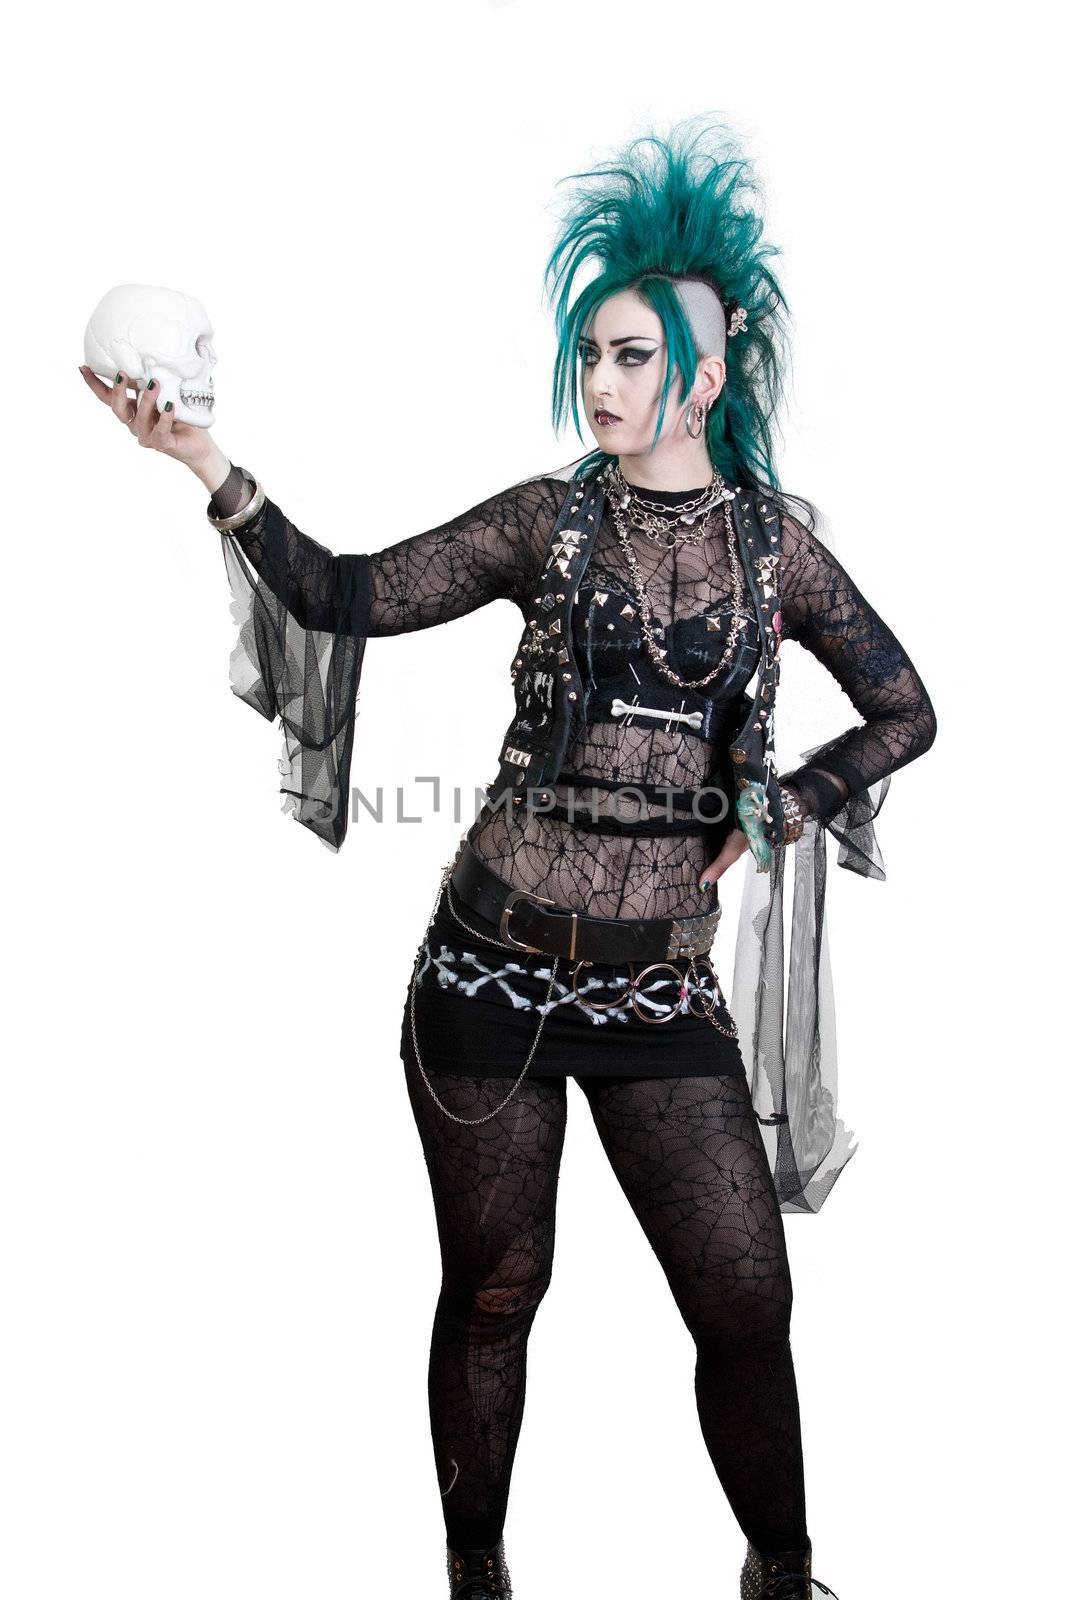 green haired postpunk girl with a skull in her hand. All on white background